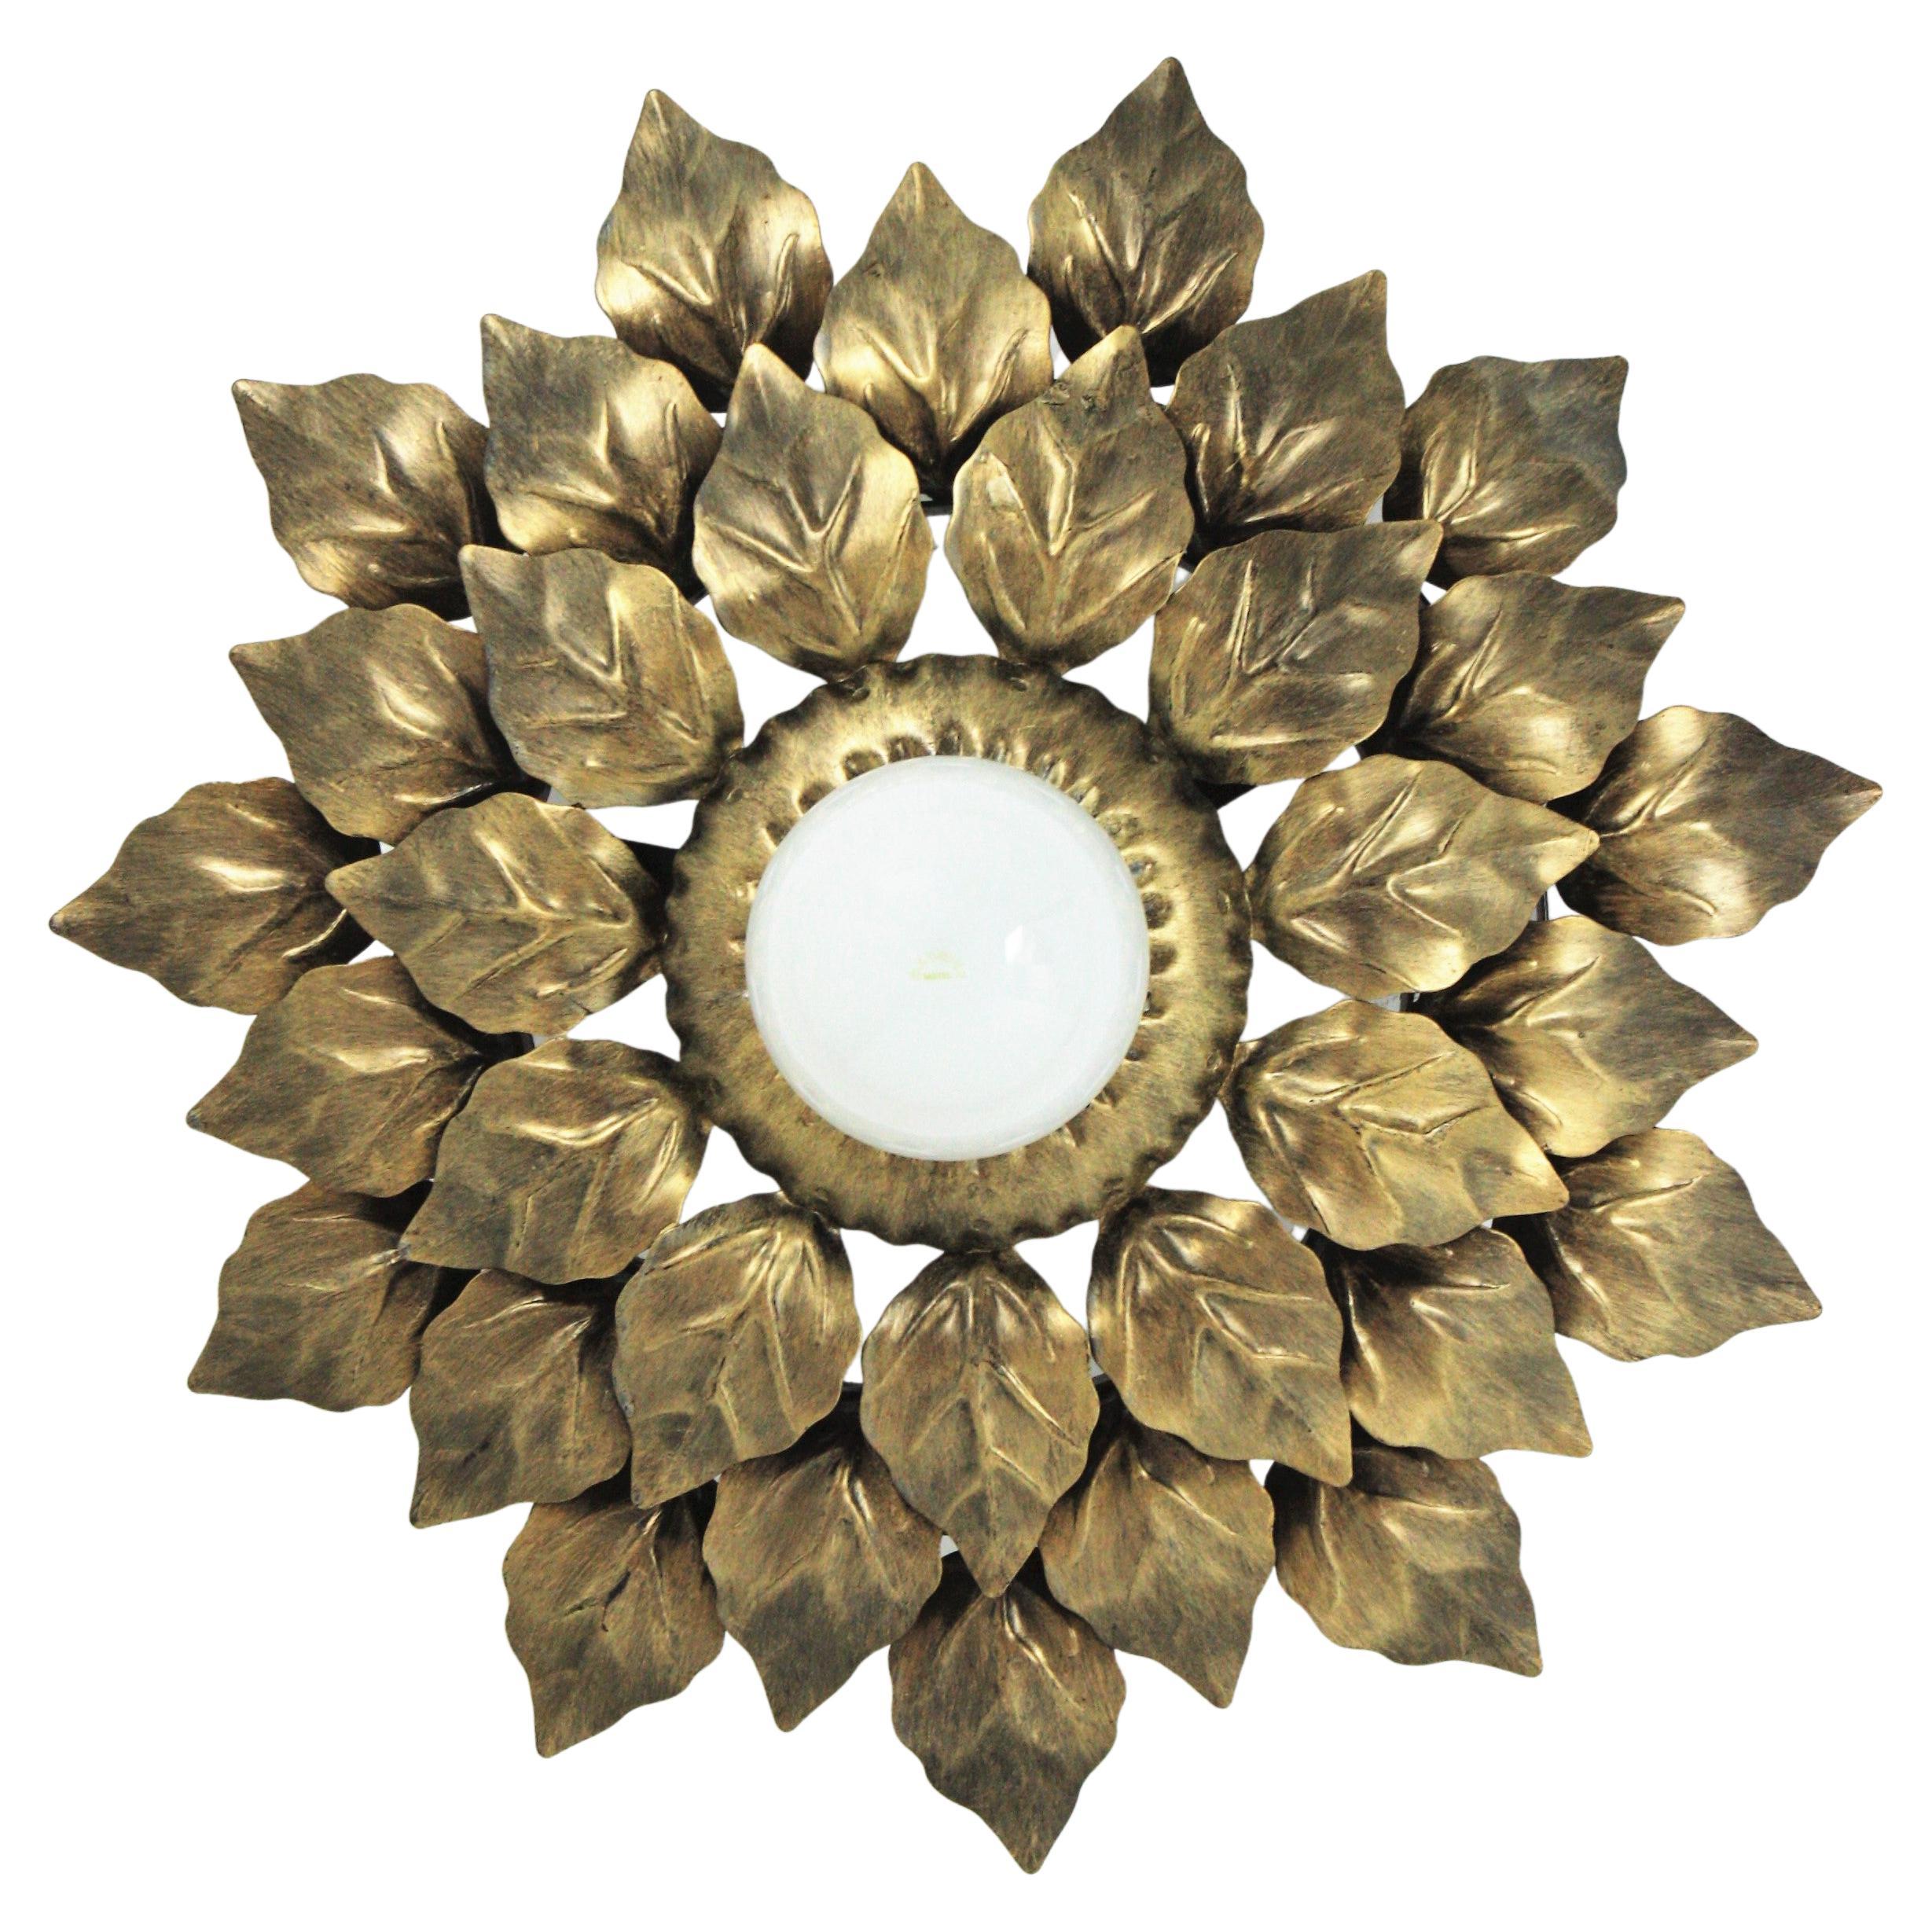 Gilt metal triple layered leafed sunburst ceiling flush mount. Spain, 1960s.
An eye-catching sunburst or flower burst ceiling flush mount with three layers of gilt silvered leaves surrounding a central exposed bulb.
It can be placed flush mounted or